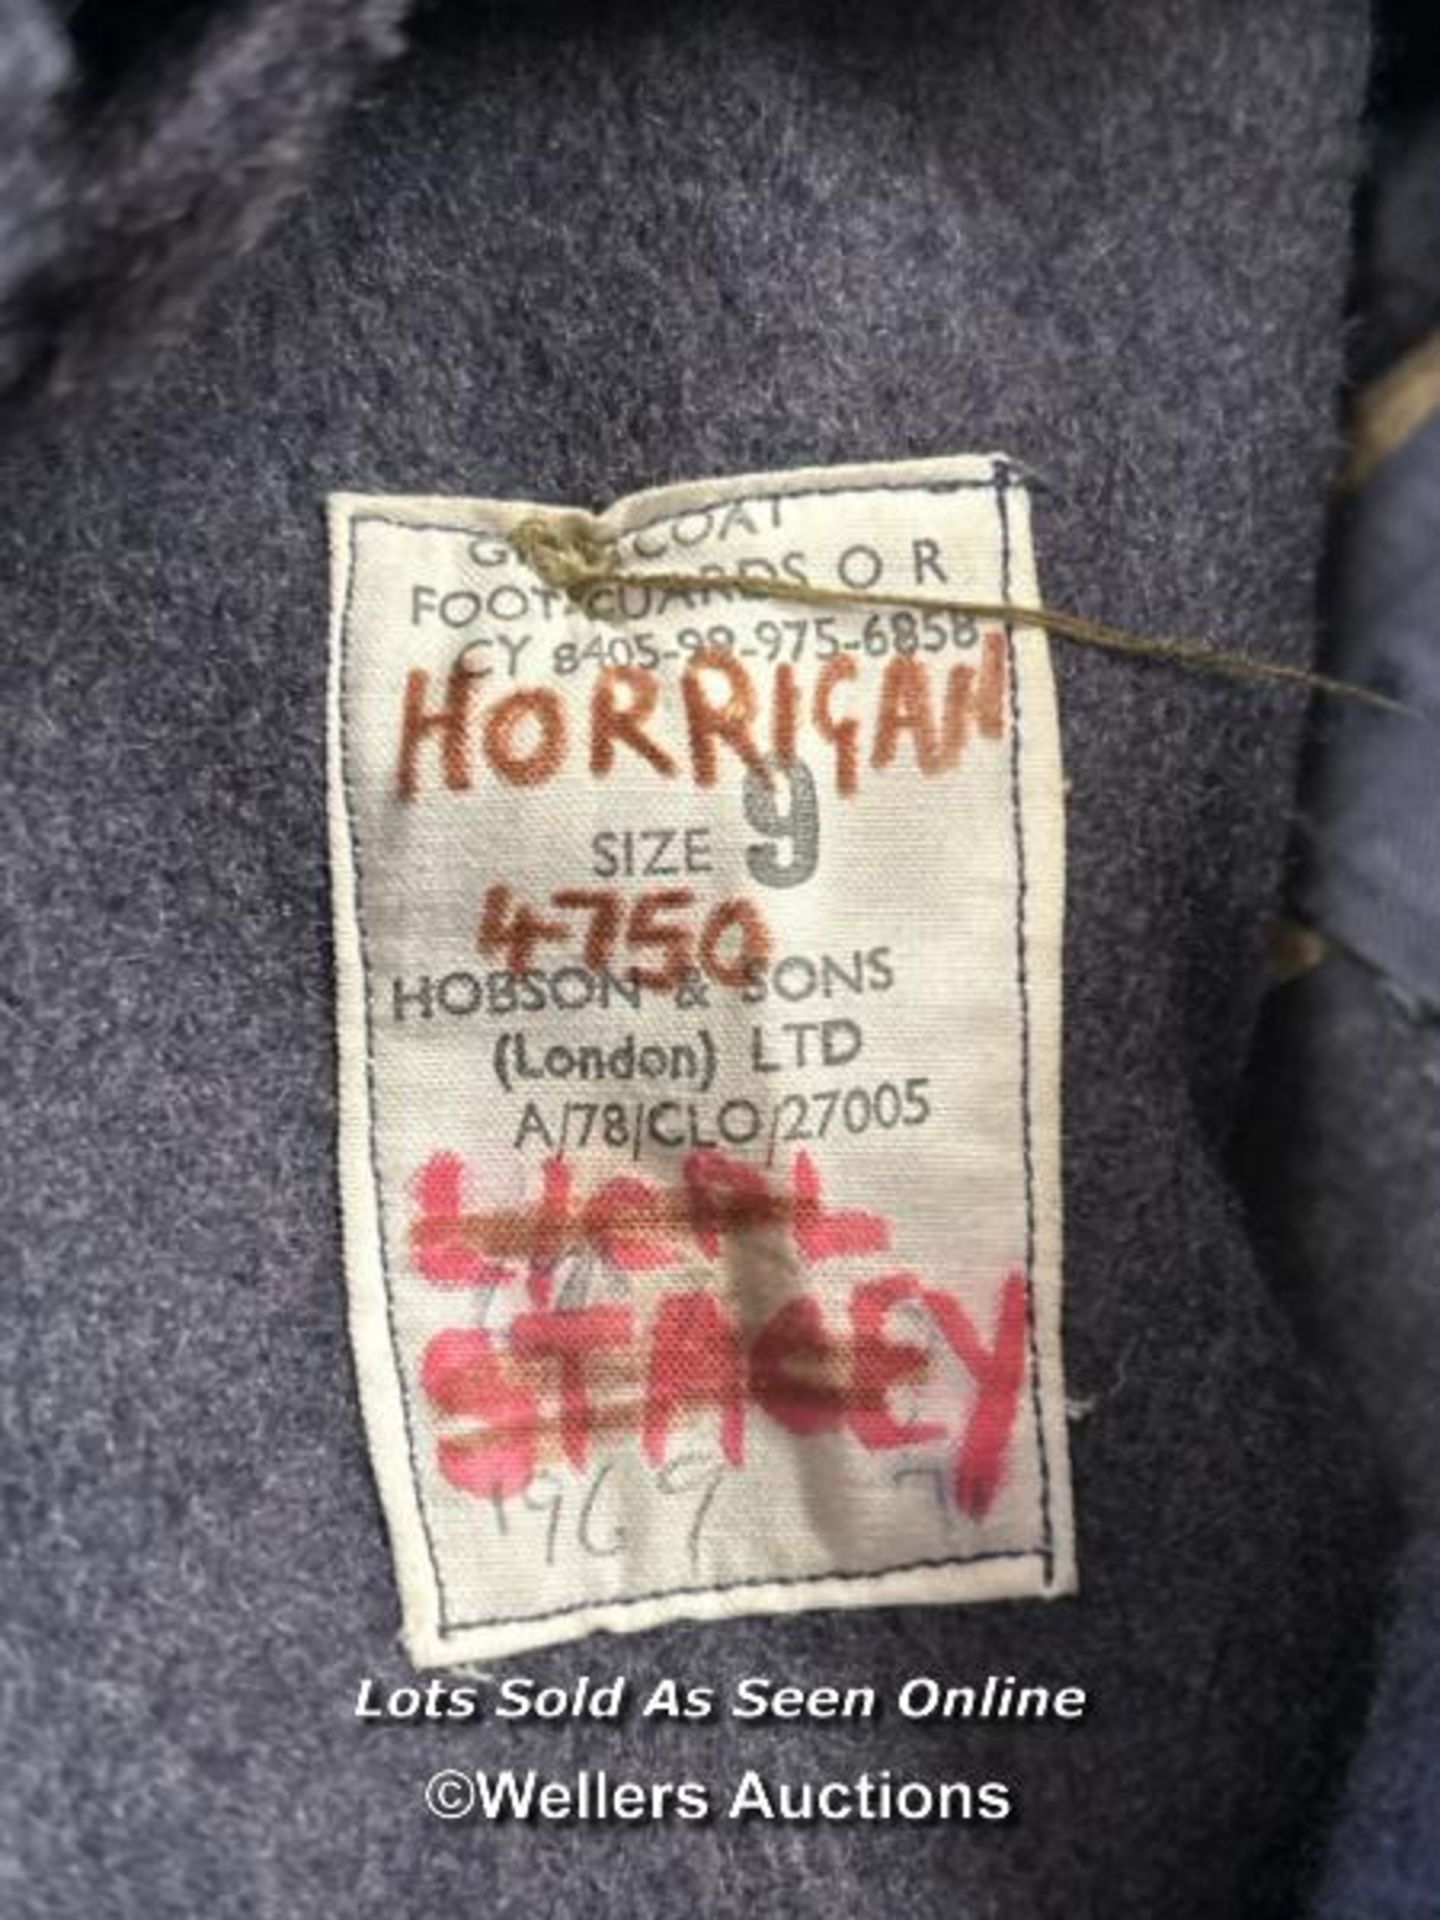 1969 GREY FOOT GUARDS COAT BY HOBSON & SONS - Image 5 of 5